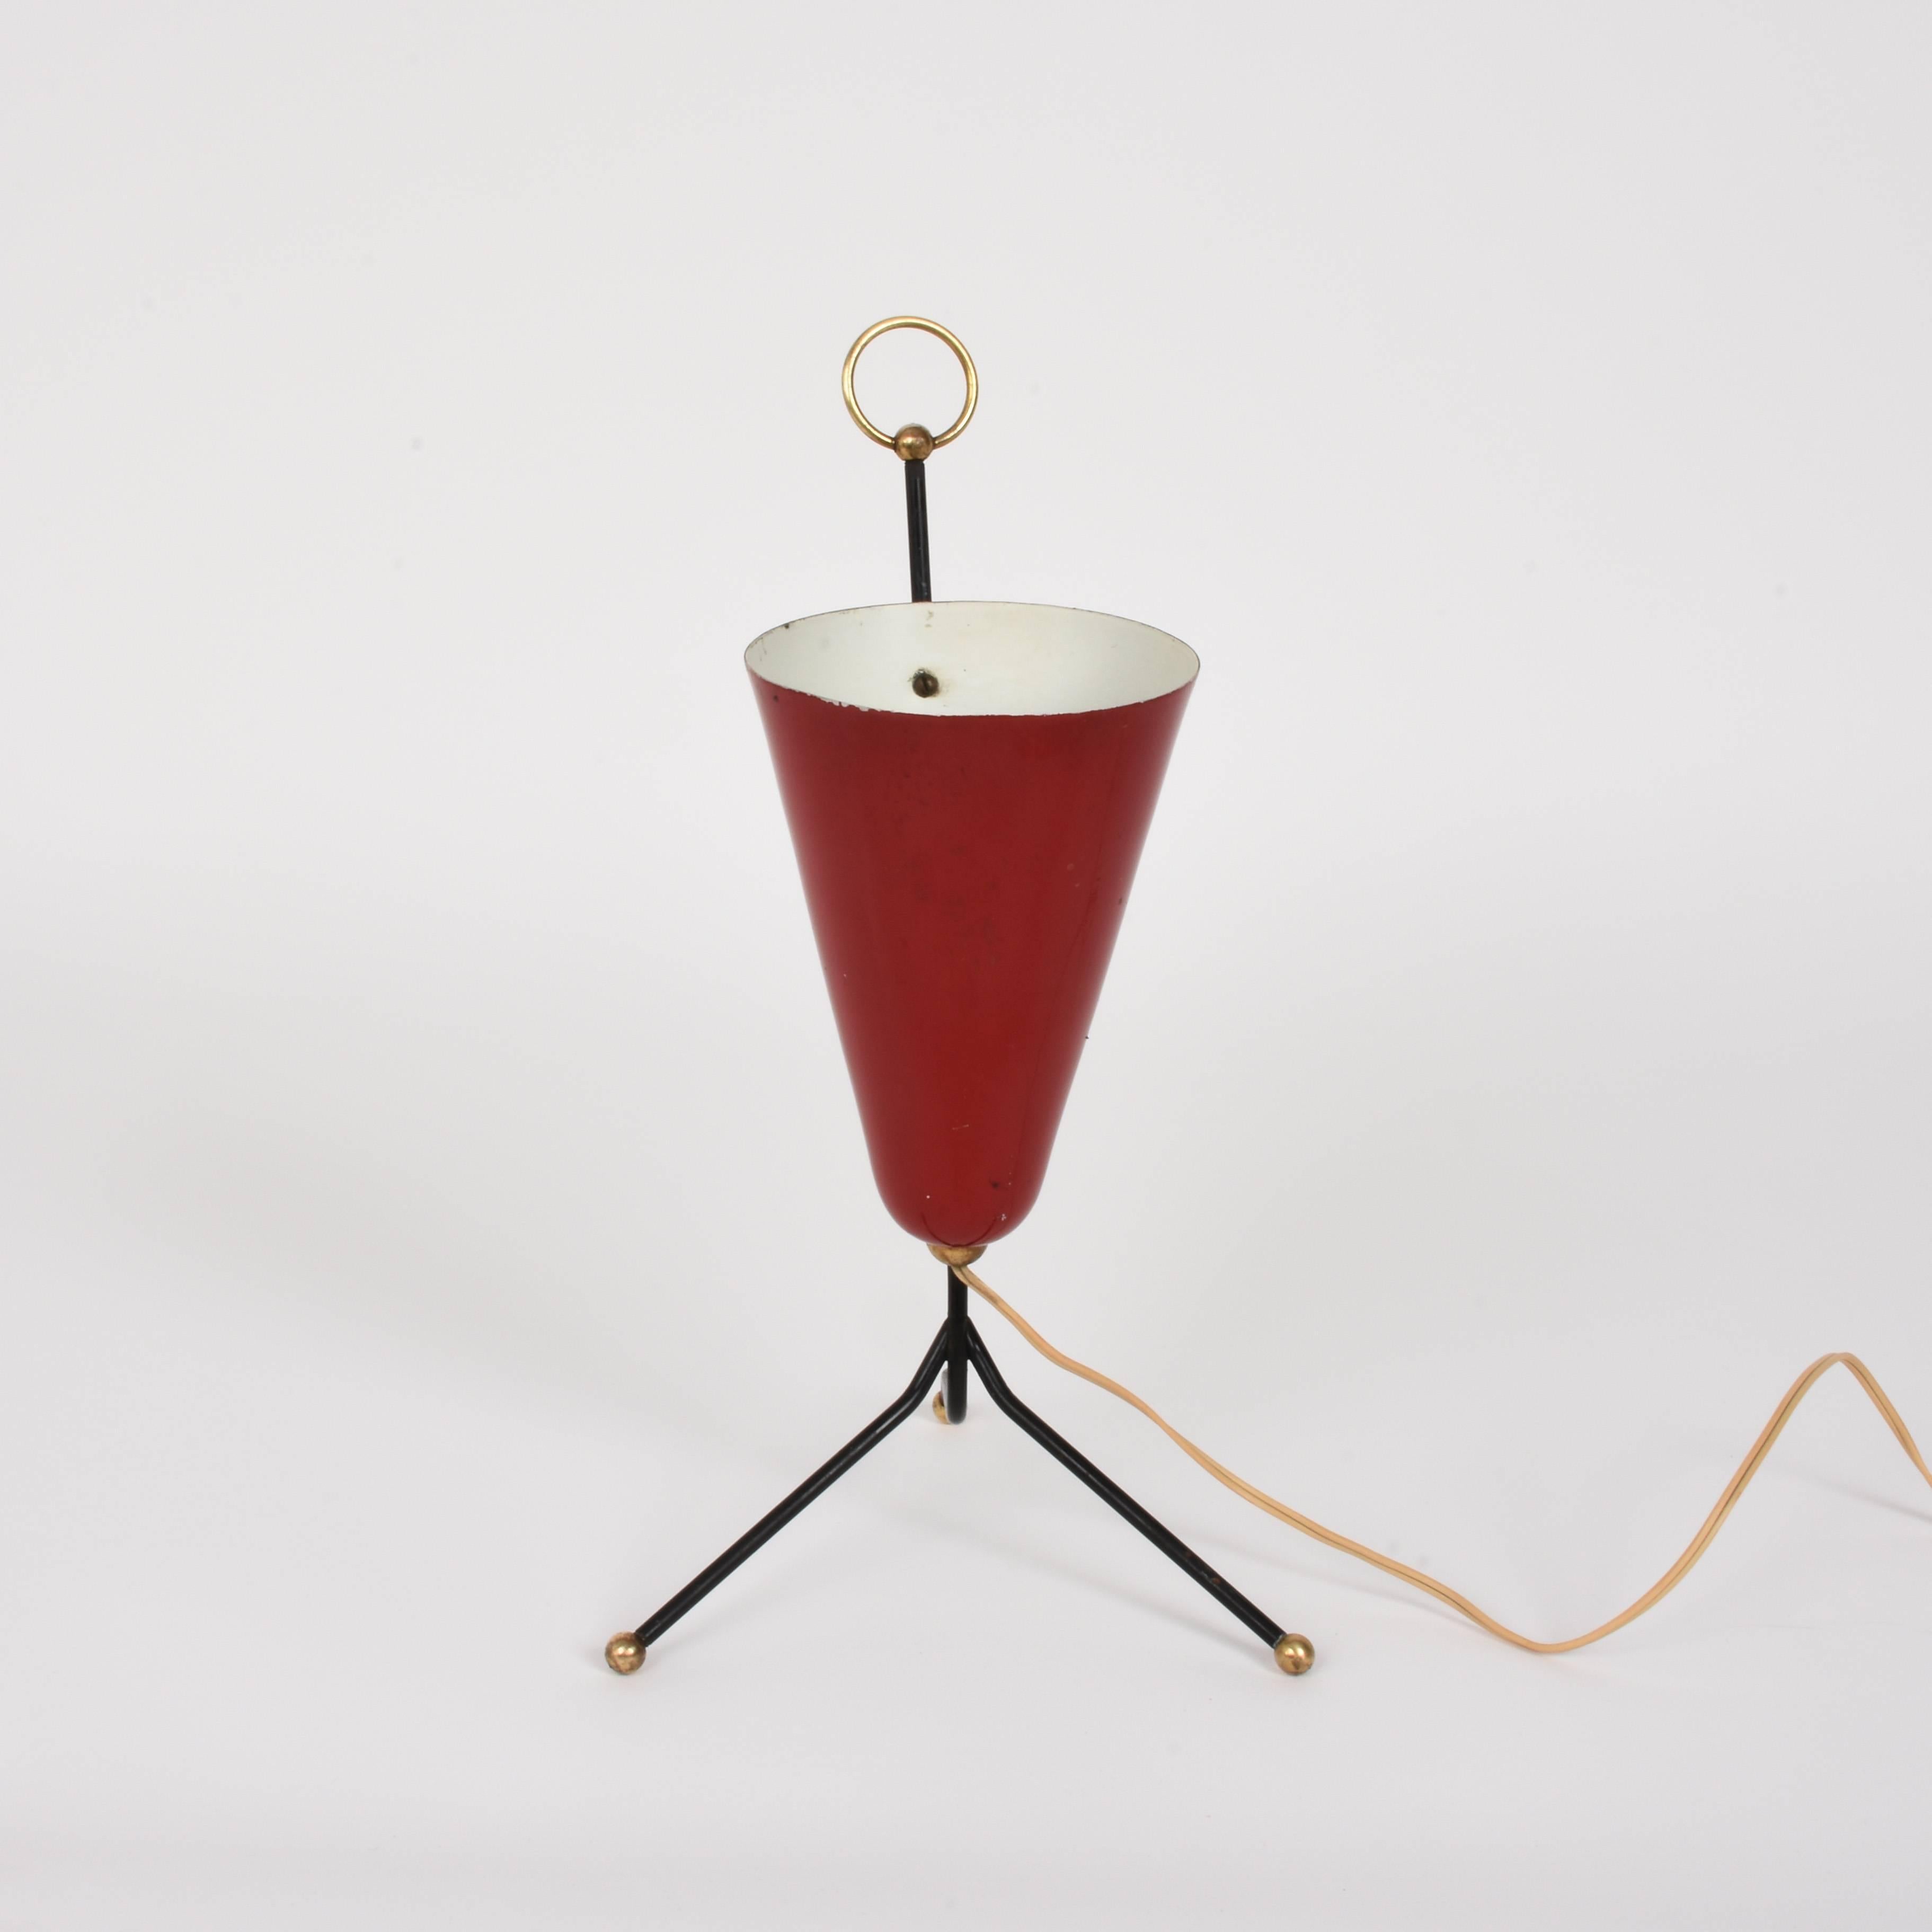 Mid-Century Modern Red Lacquered Metal and Brass Conical Italian Table Lamp with Tripod, 1950s For Sale